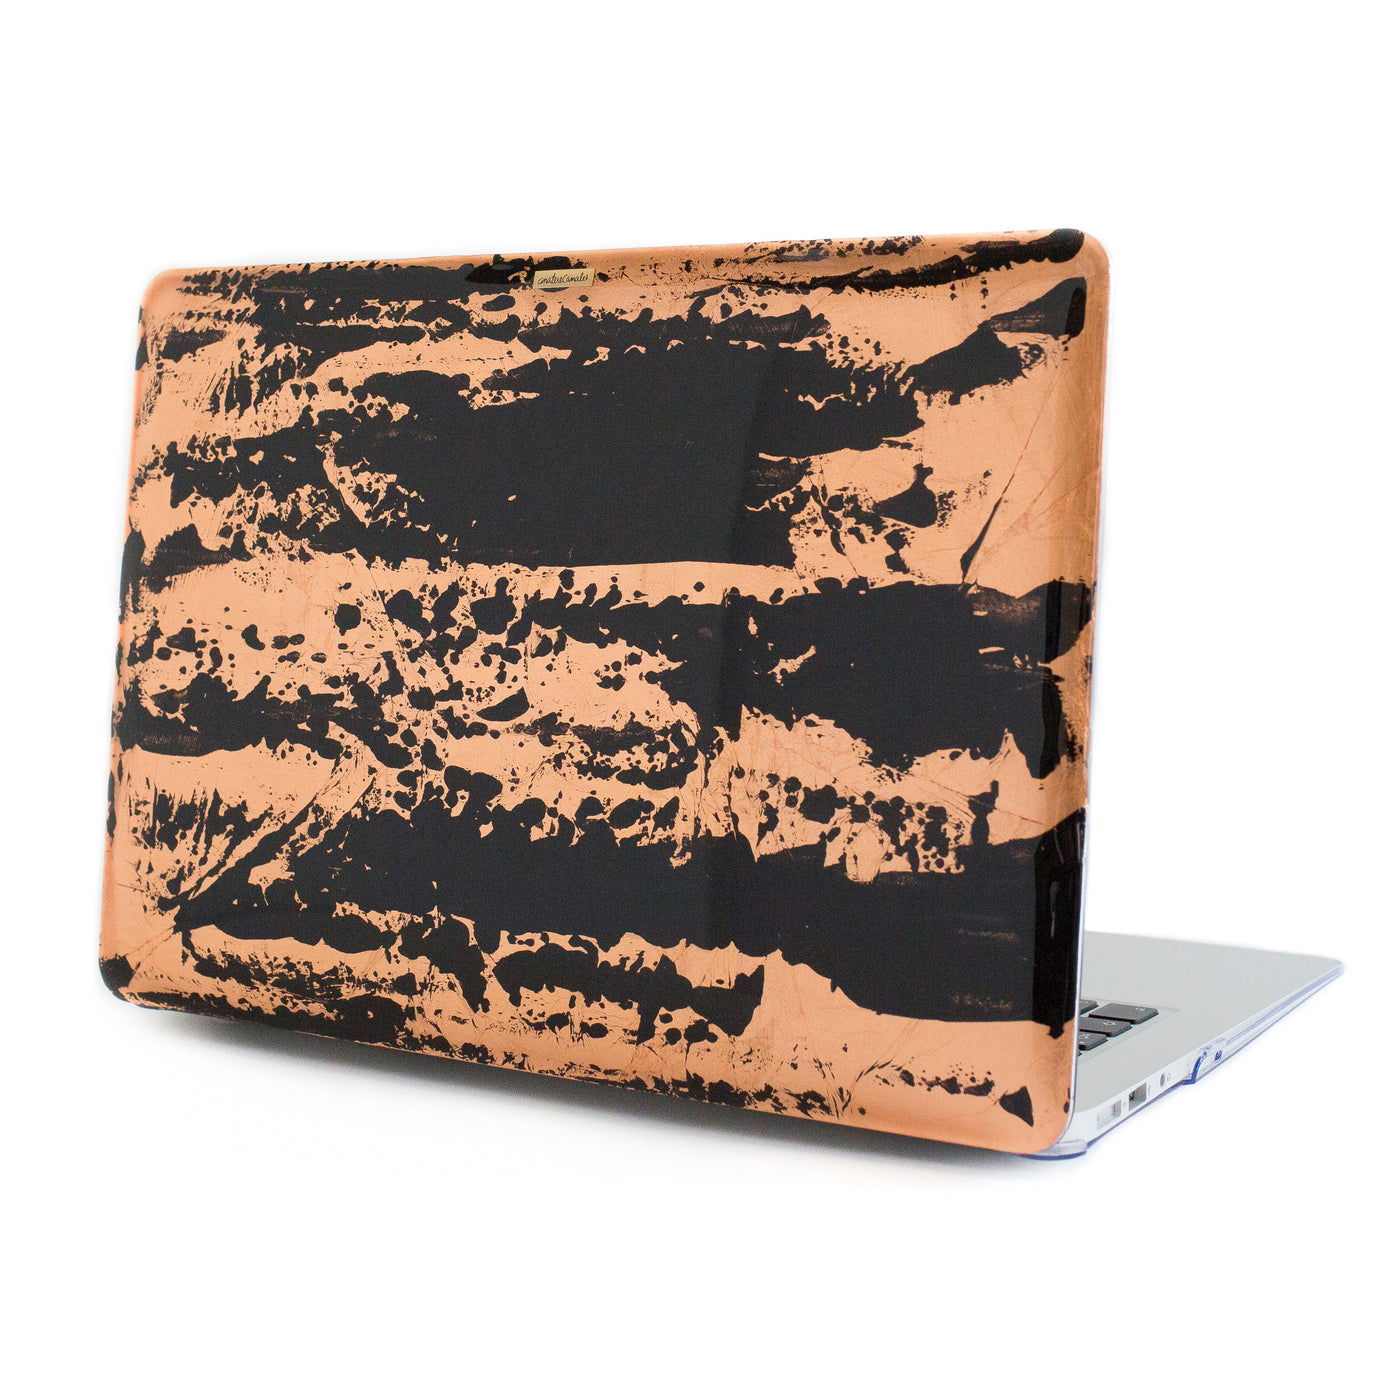 Black Rose Gold Macbook - Ana Tere Canales